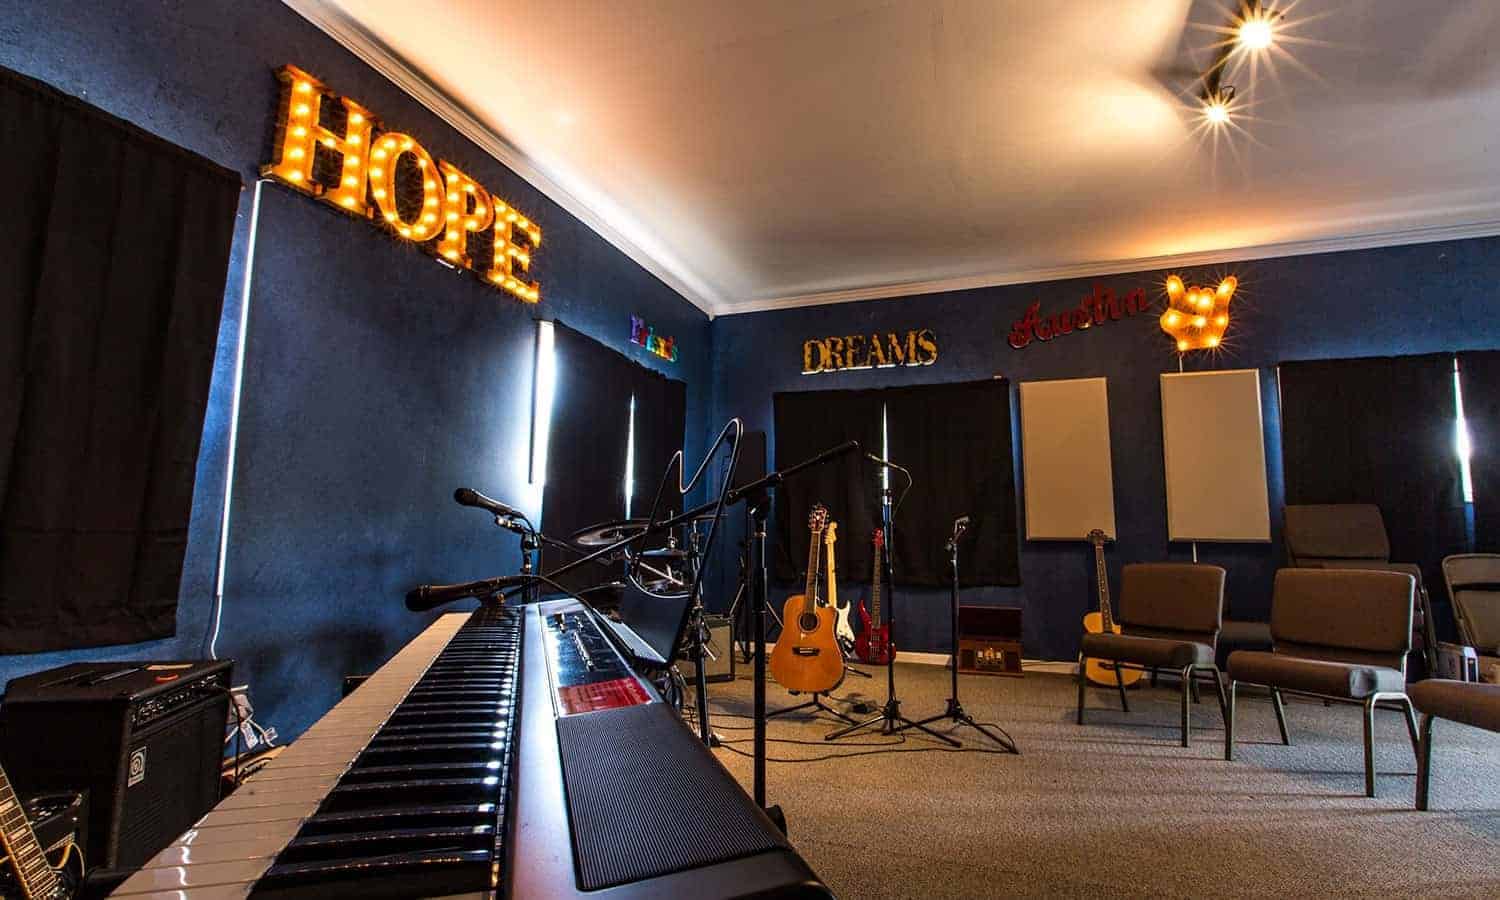 5 Ways Recovery Unplugged Integrates Music into Addiction Recovery|Addiction in the Workplace: Industries with the Highest Rates of Substance Abuse|5 Ways Recovery Unplugged Integrates Music into Addiction Recovery